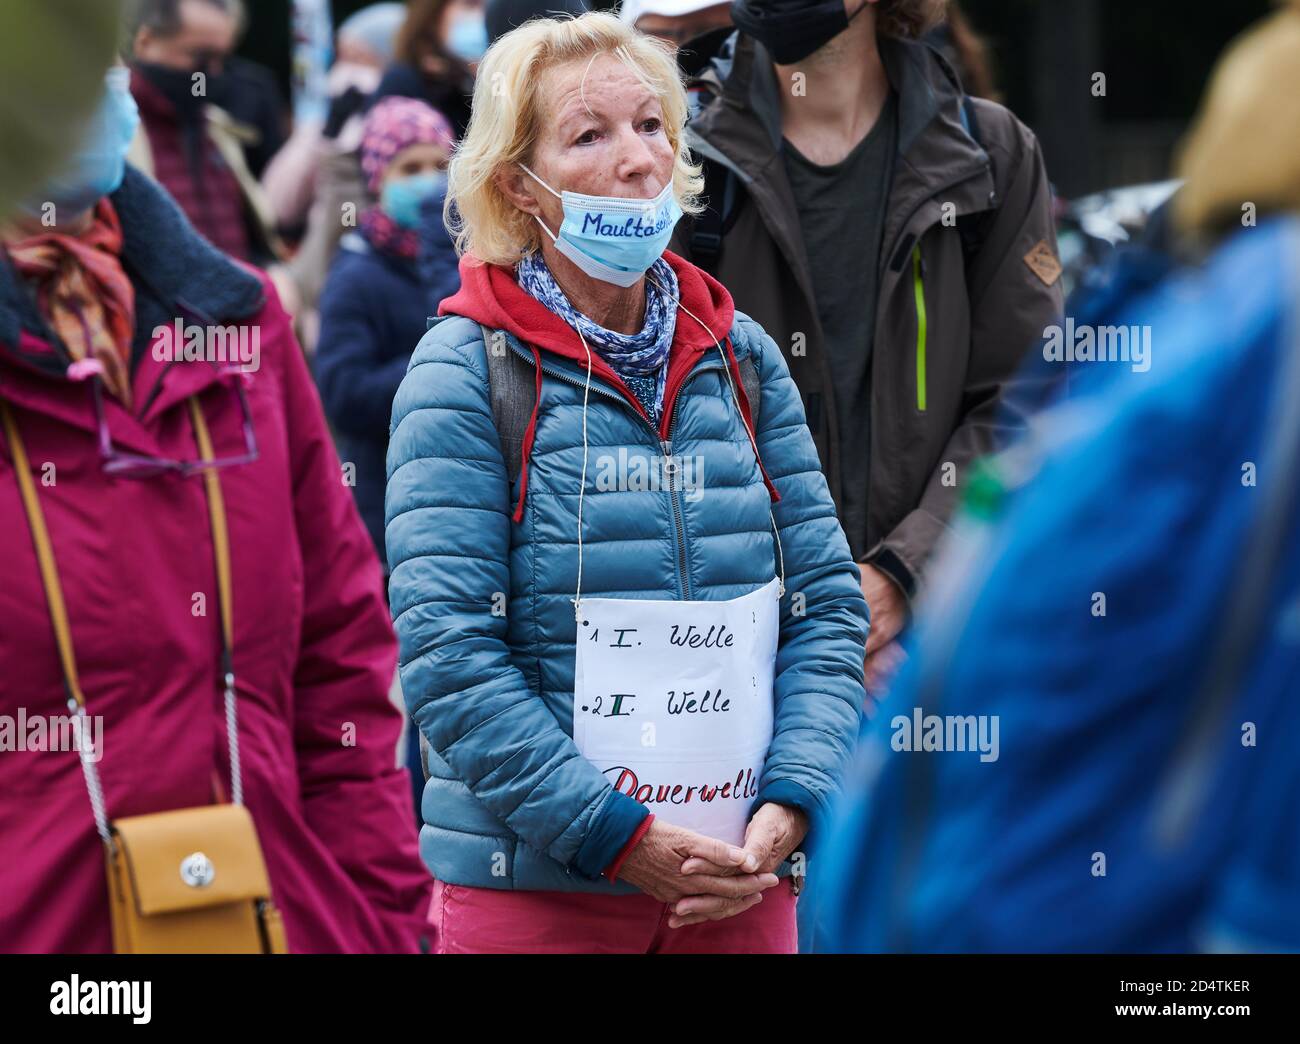 Berlin, Germany. 11th Oct, 2020. '1st wave - 2nd wave - permanent wave' is written on the poster that a demonstrator hung around her stomach during the lateral thinking demonstration in front of the Brandenburg Gate. 'Maultäschle' is written on her mouth guard. Credit: Annette Riedl/dpa/Alamy Live News Stock Photo